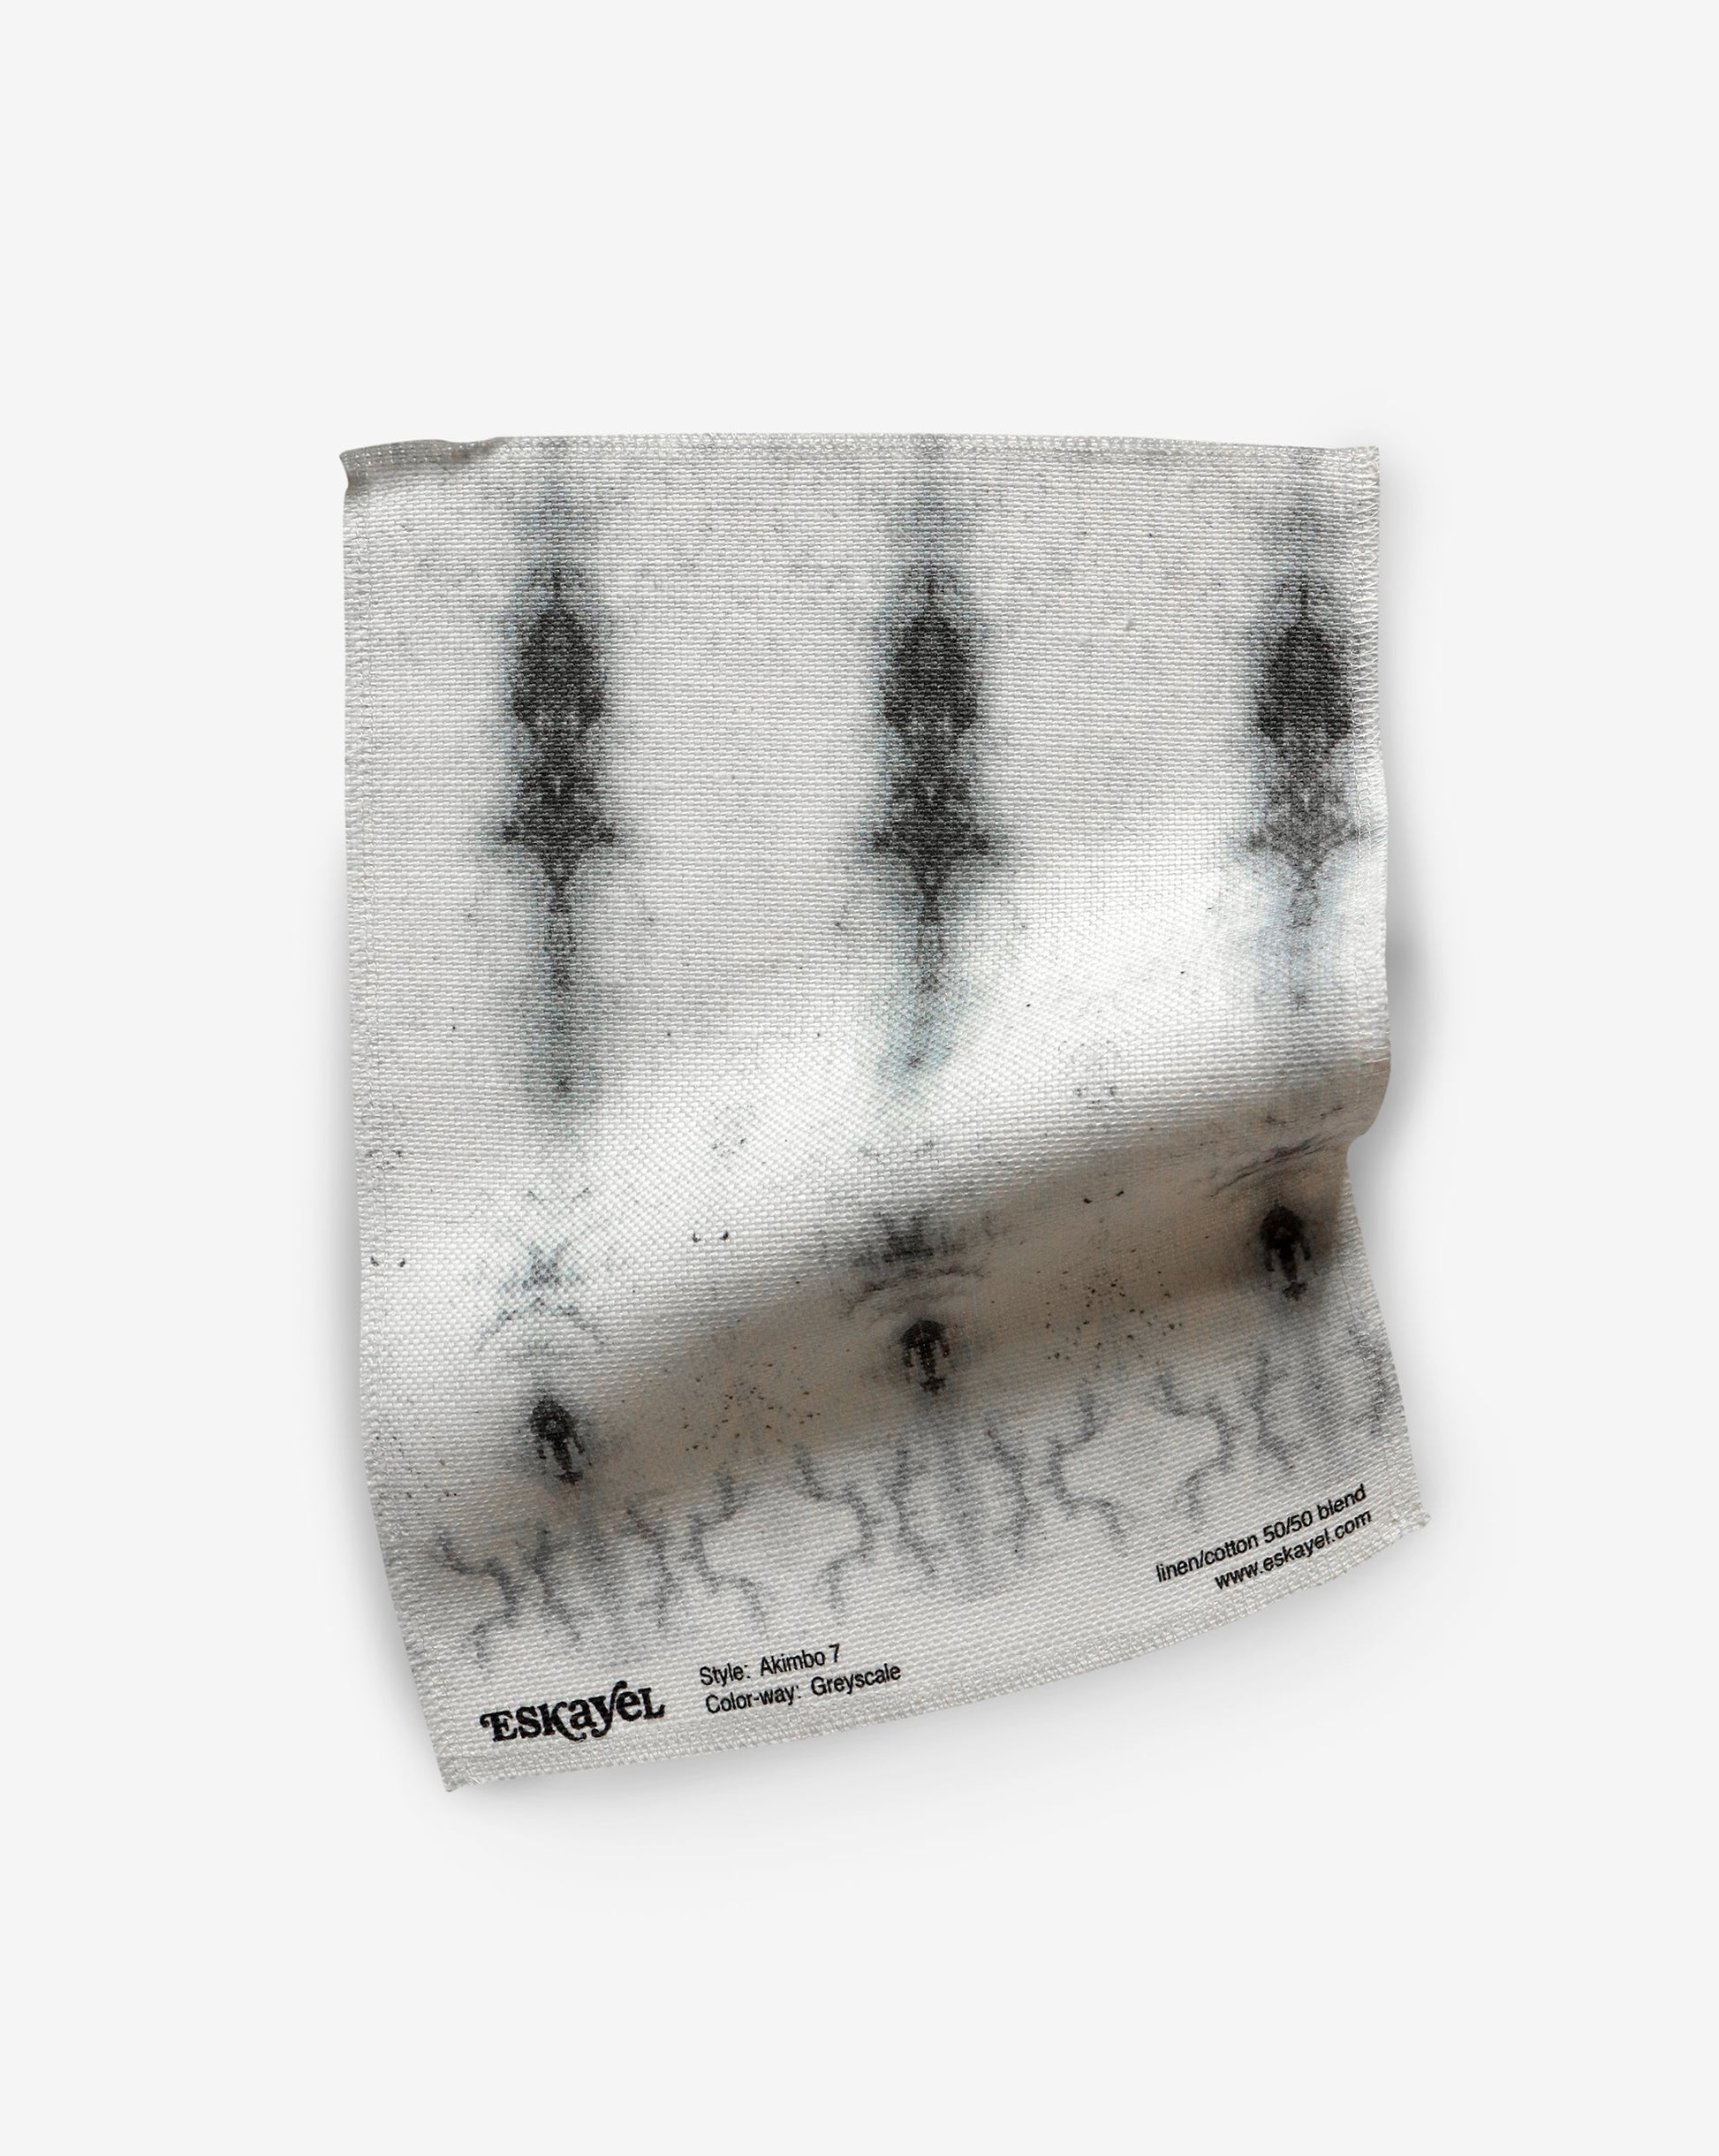 A fabric with Akimbo 7 Fabric Sample Greyscale pattern on it can be ordered as a sample